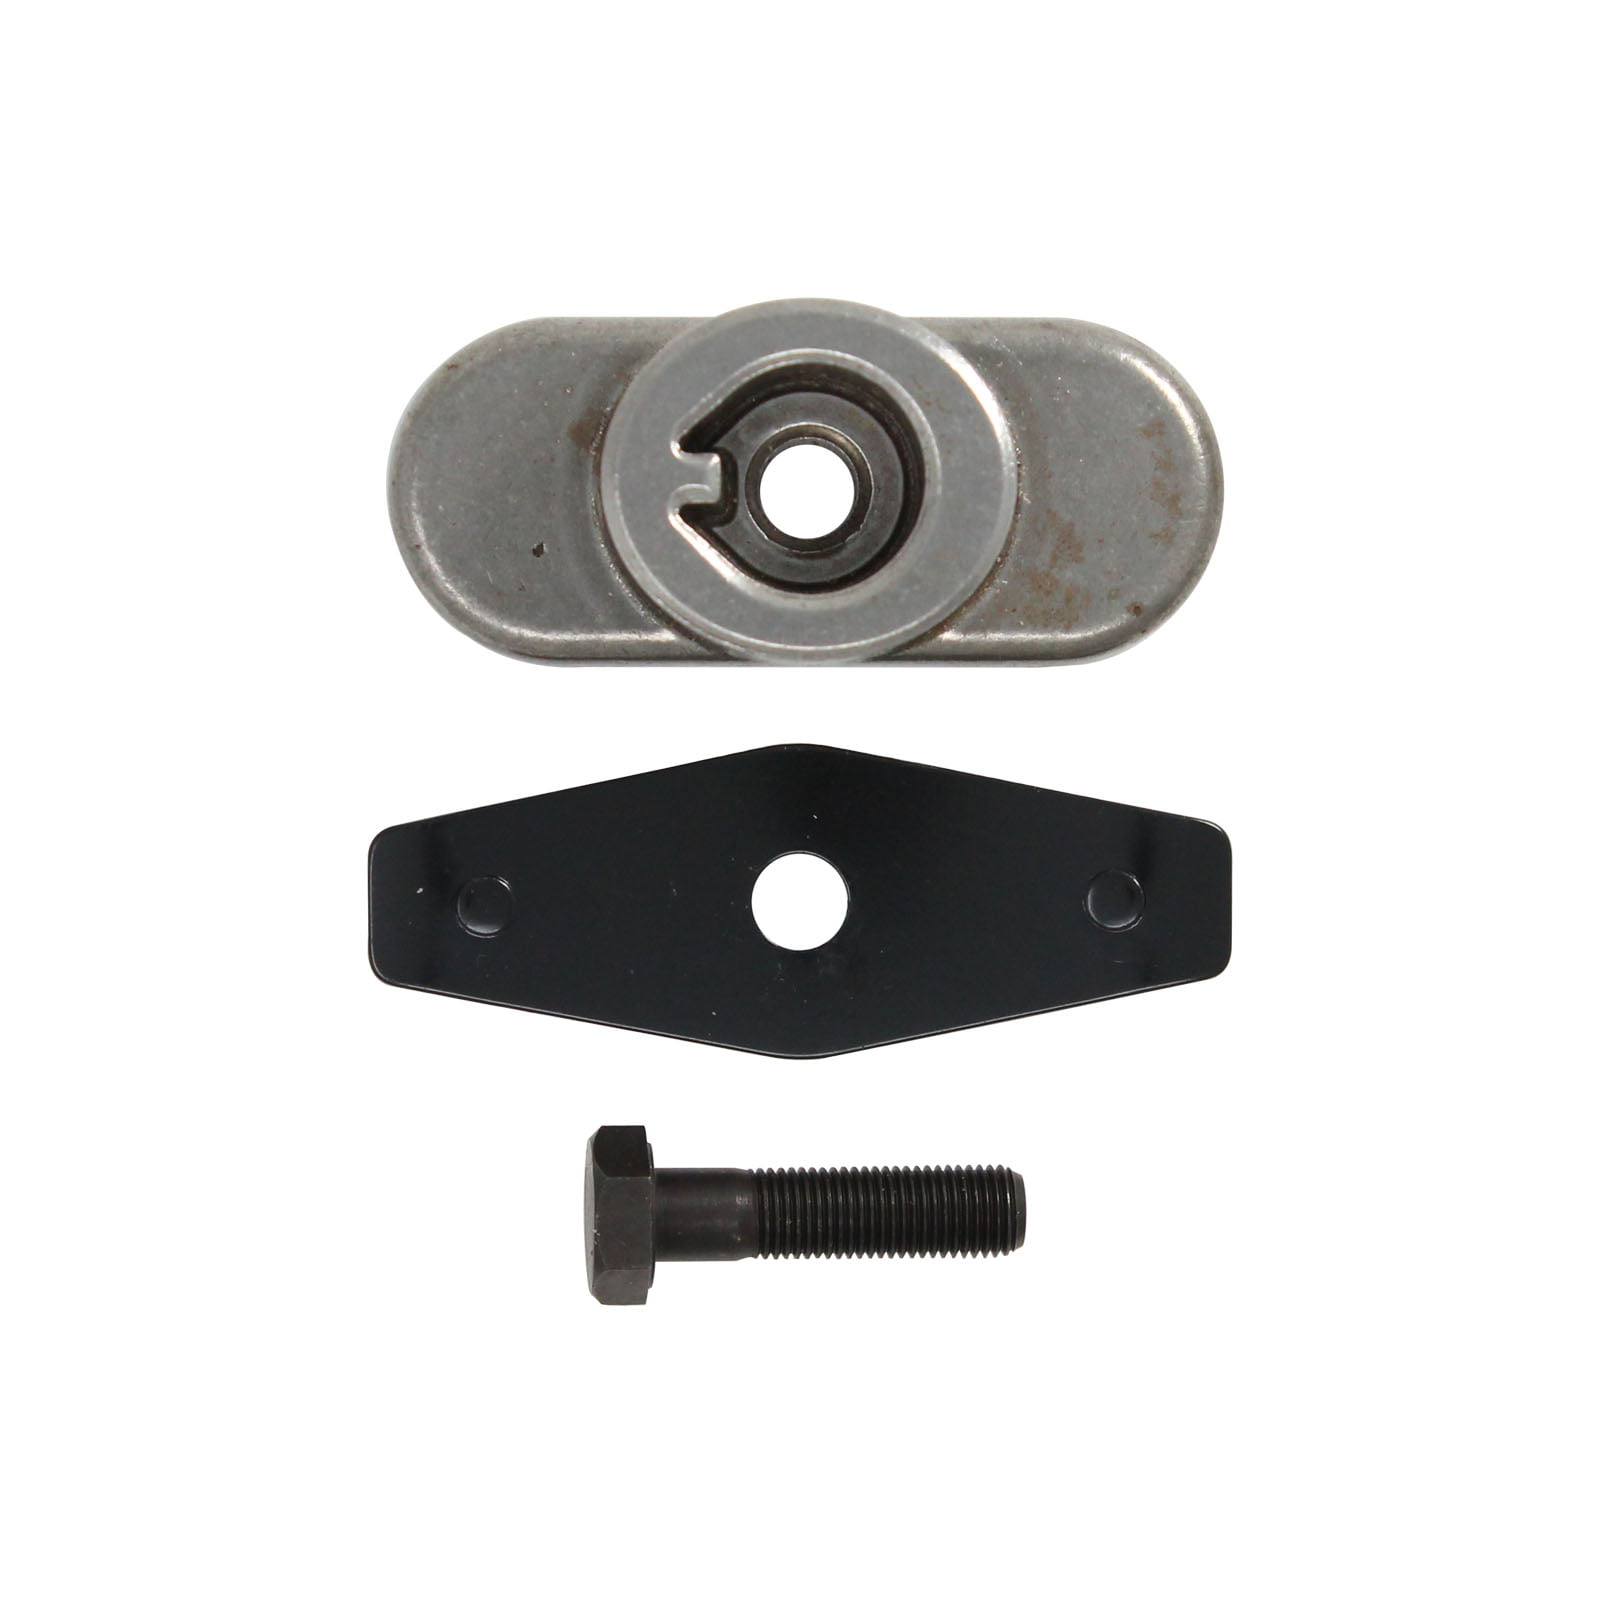 with Star Centre Lawn Mower Blade Adapter Kit